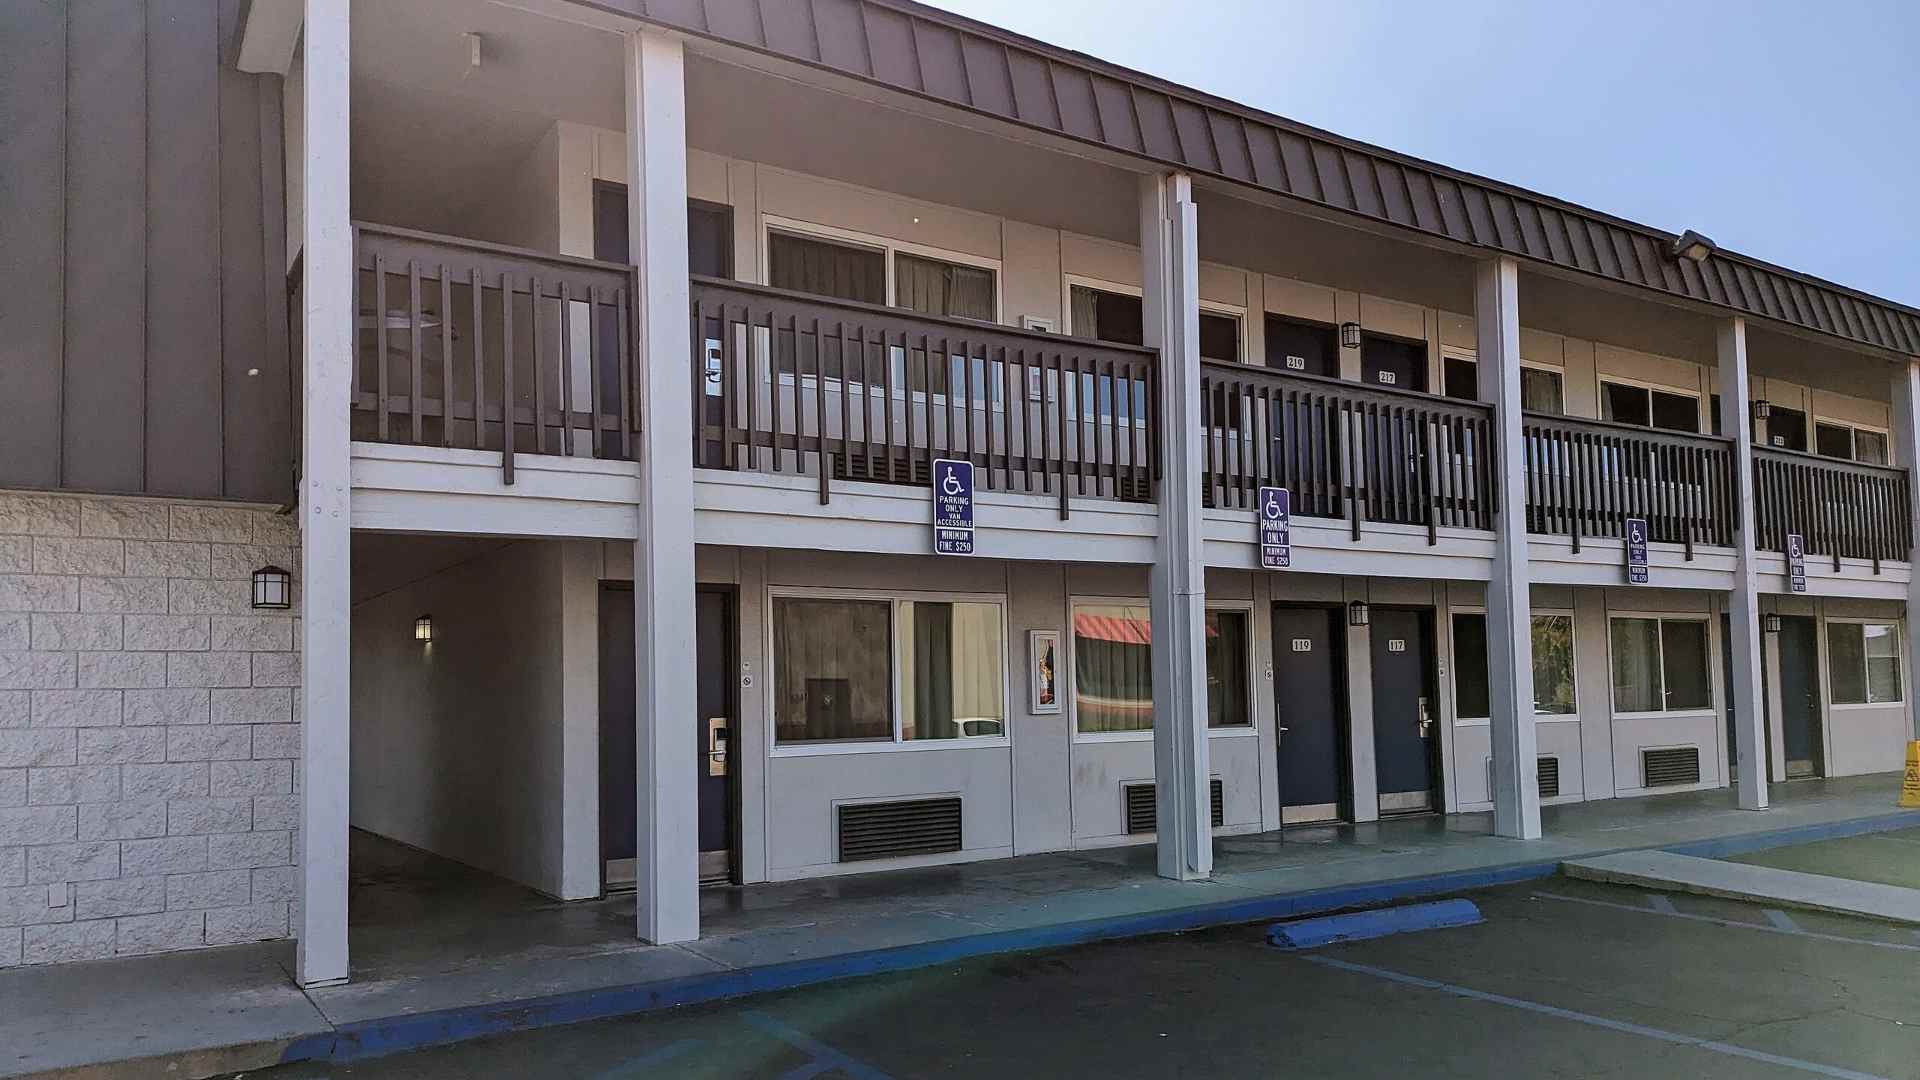 A hotel with multiple stories located in California.